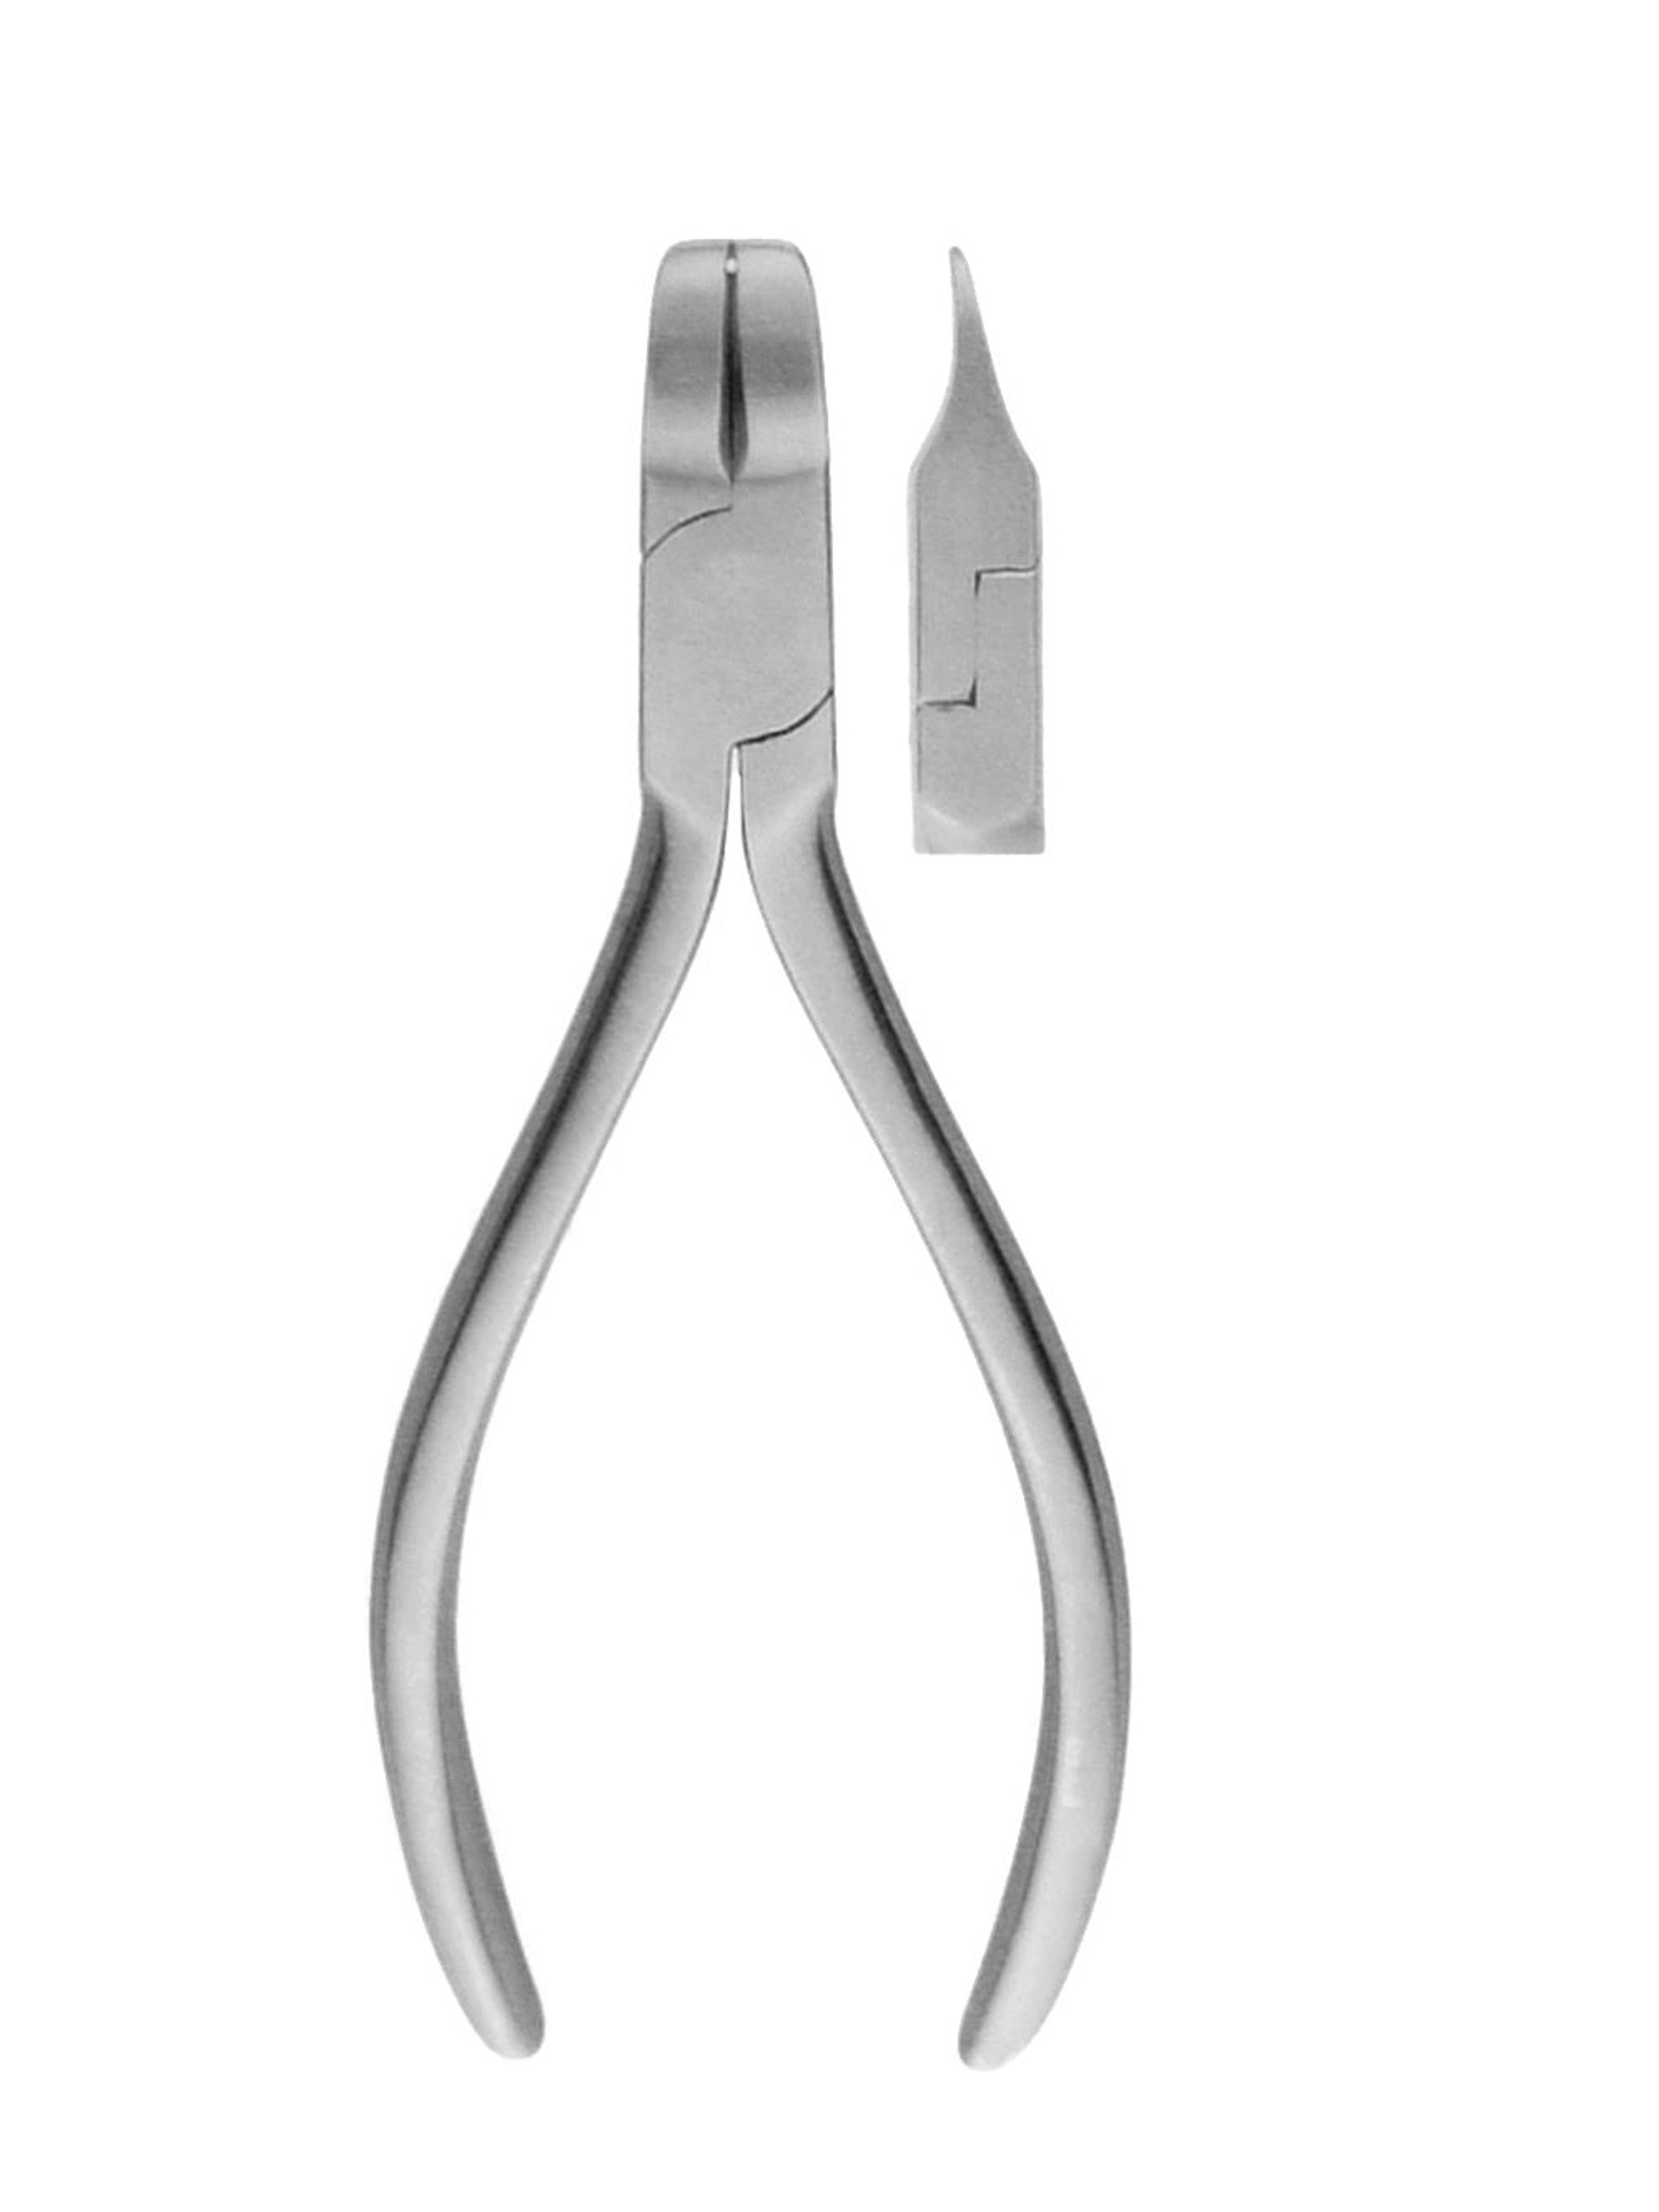 Orthodontic Pliers ,Direct Bonding Bracket And Band Removers